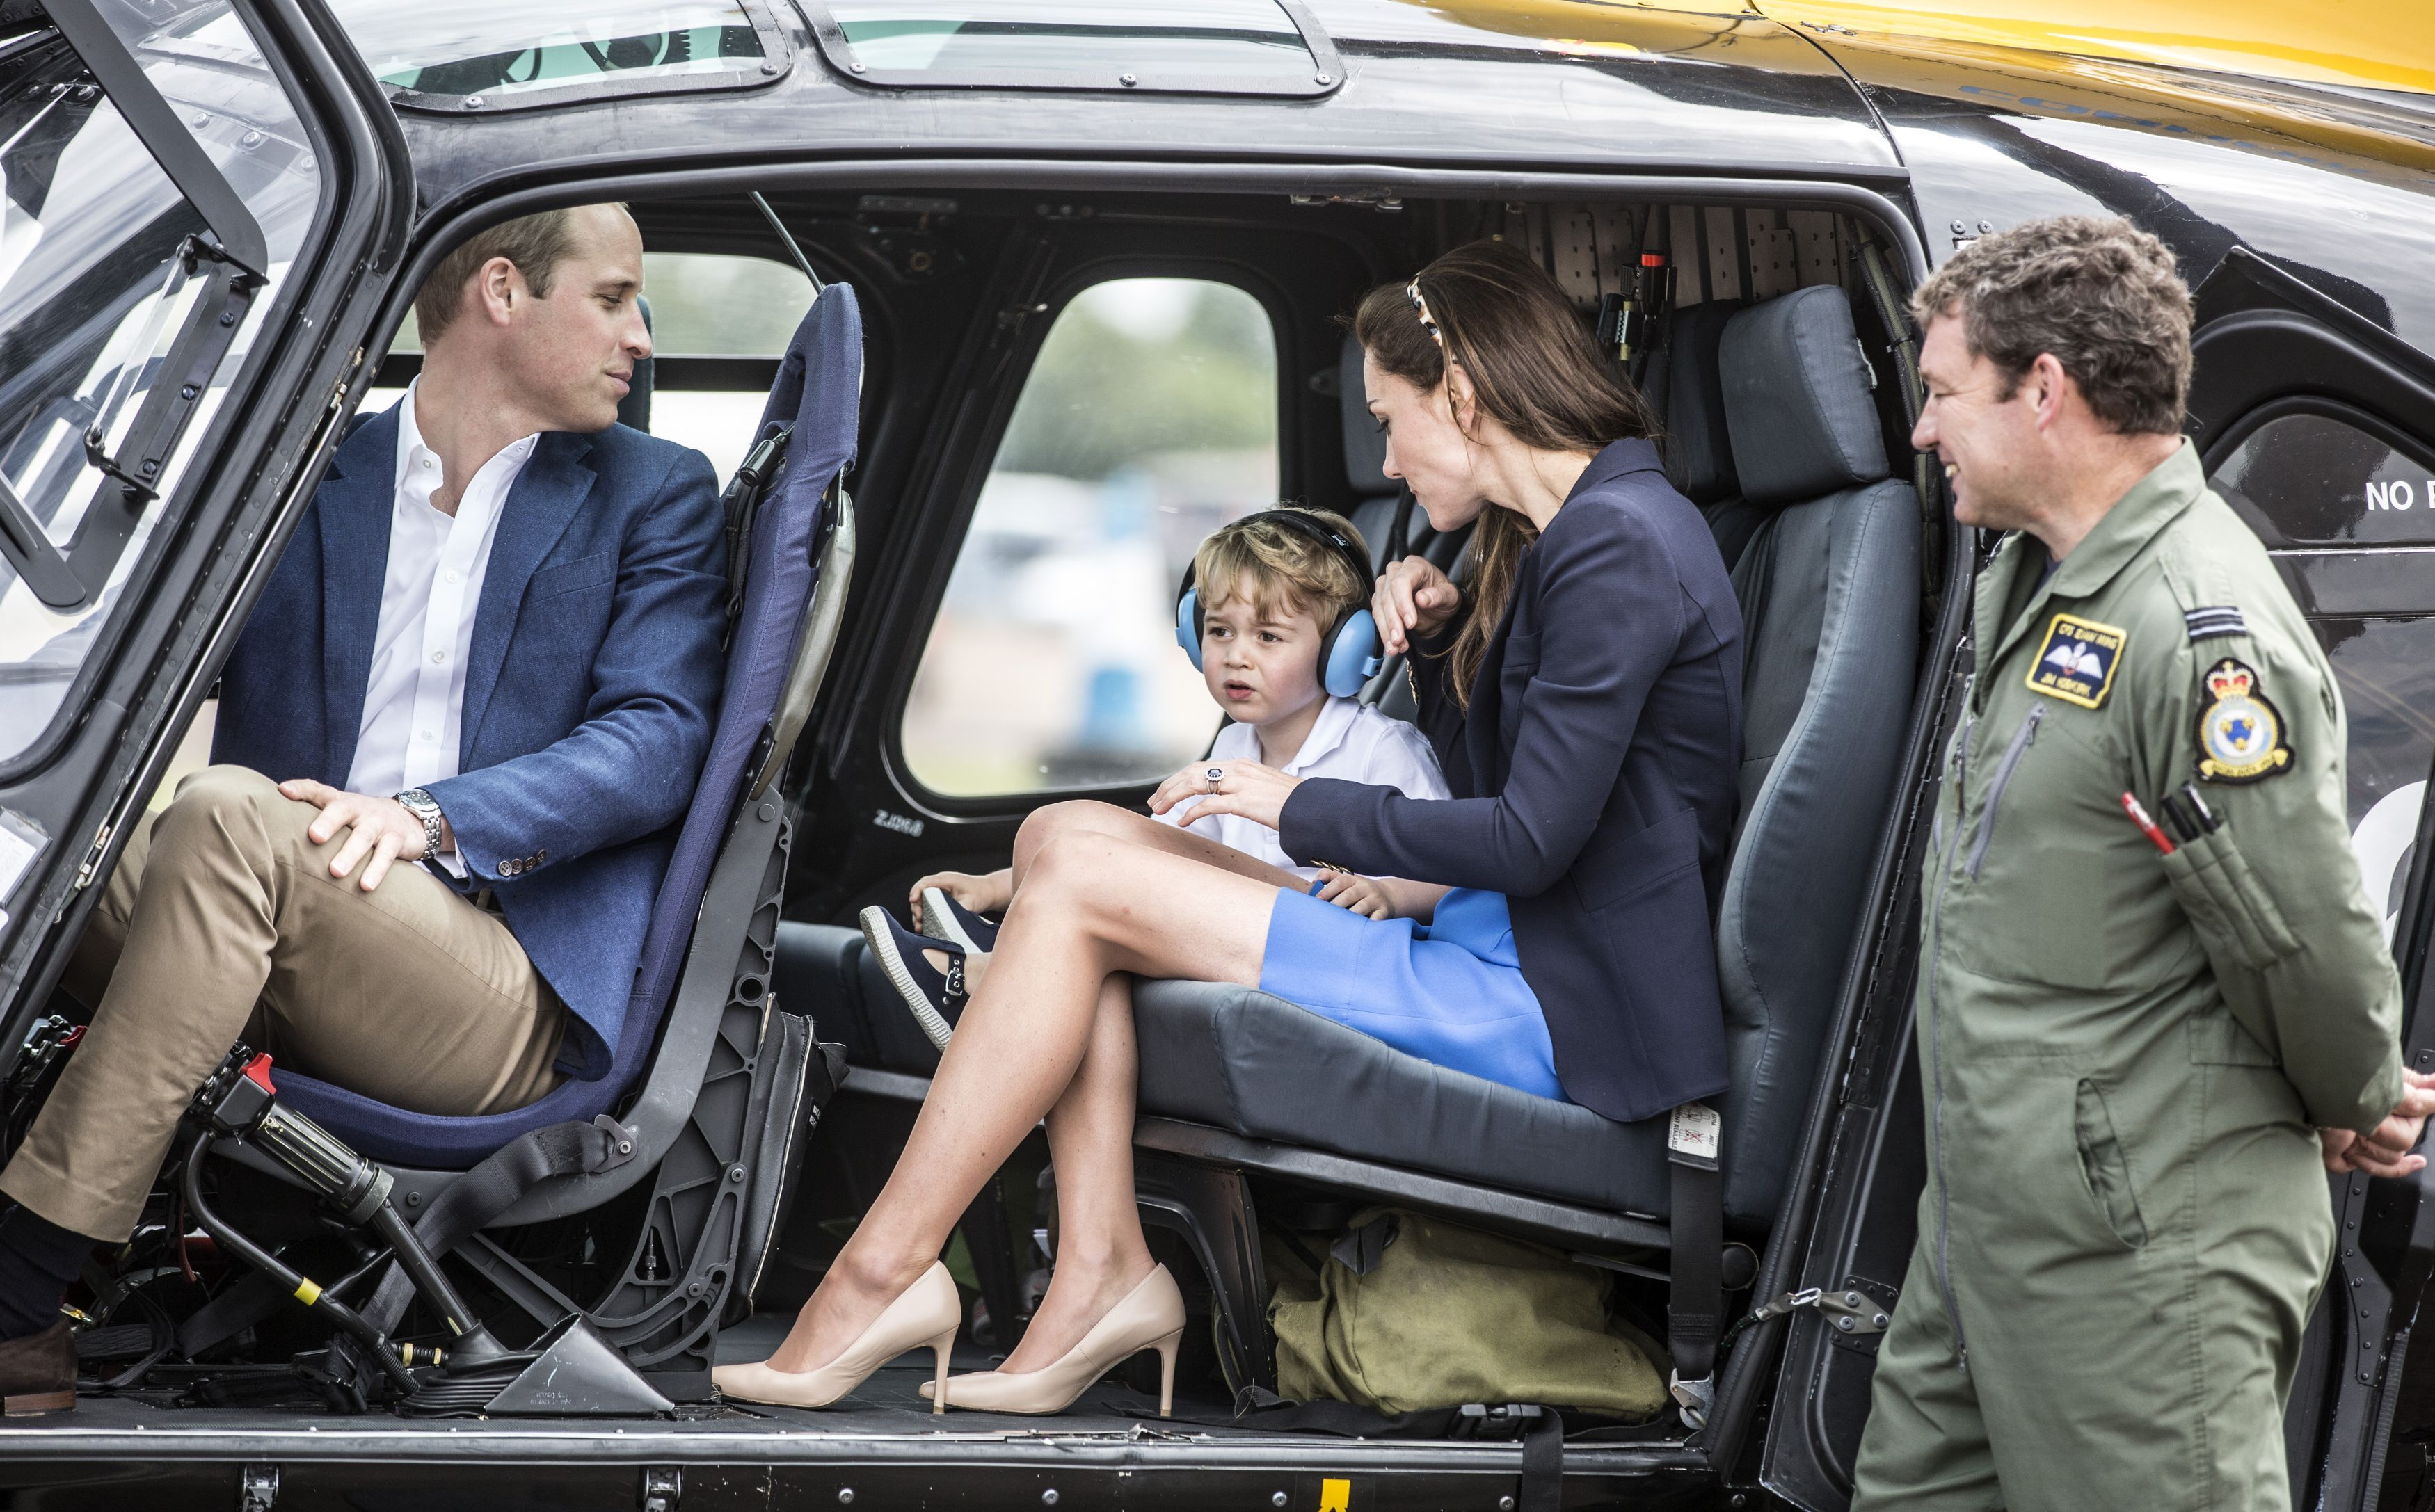 Prince George sits in a Squirrel helicopter with his parents the Duke and Duchess of Cambridge during a visit to the Royal International Air Tattoo at RAF Fairford - the world's largest military airshow 